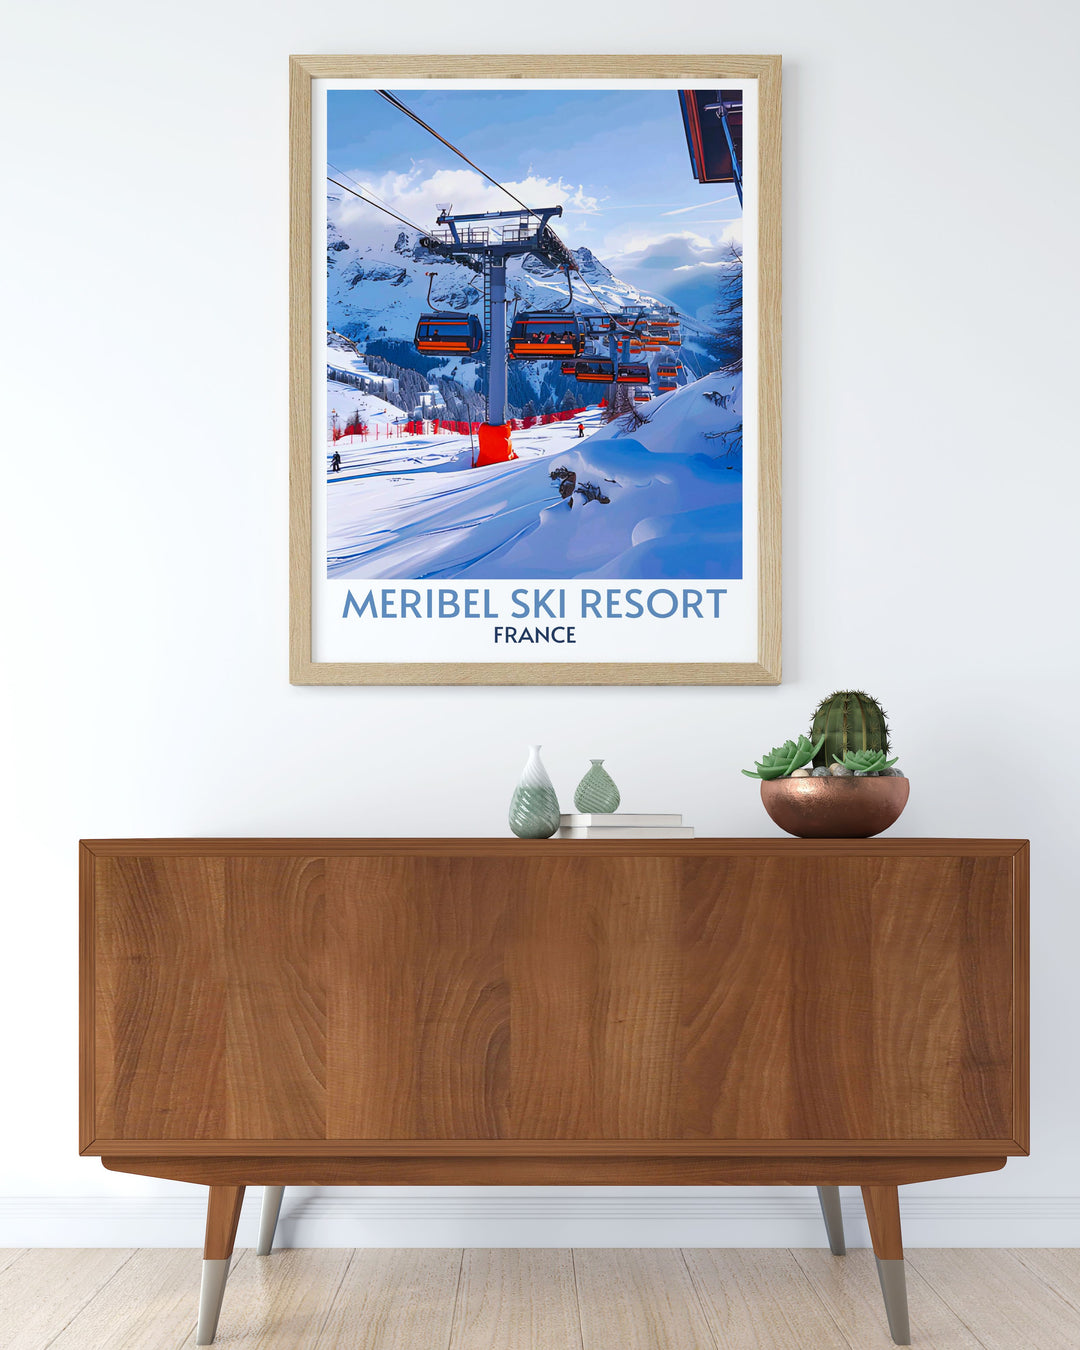 Canvas art of ski lifts in Meribel, showcasing the intricate mechanics and snowy landscape, ideal for those who admire technical and natural beauty alike.